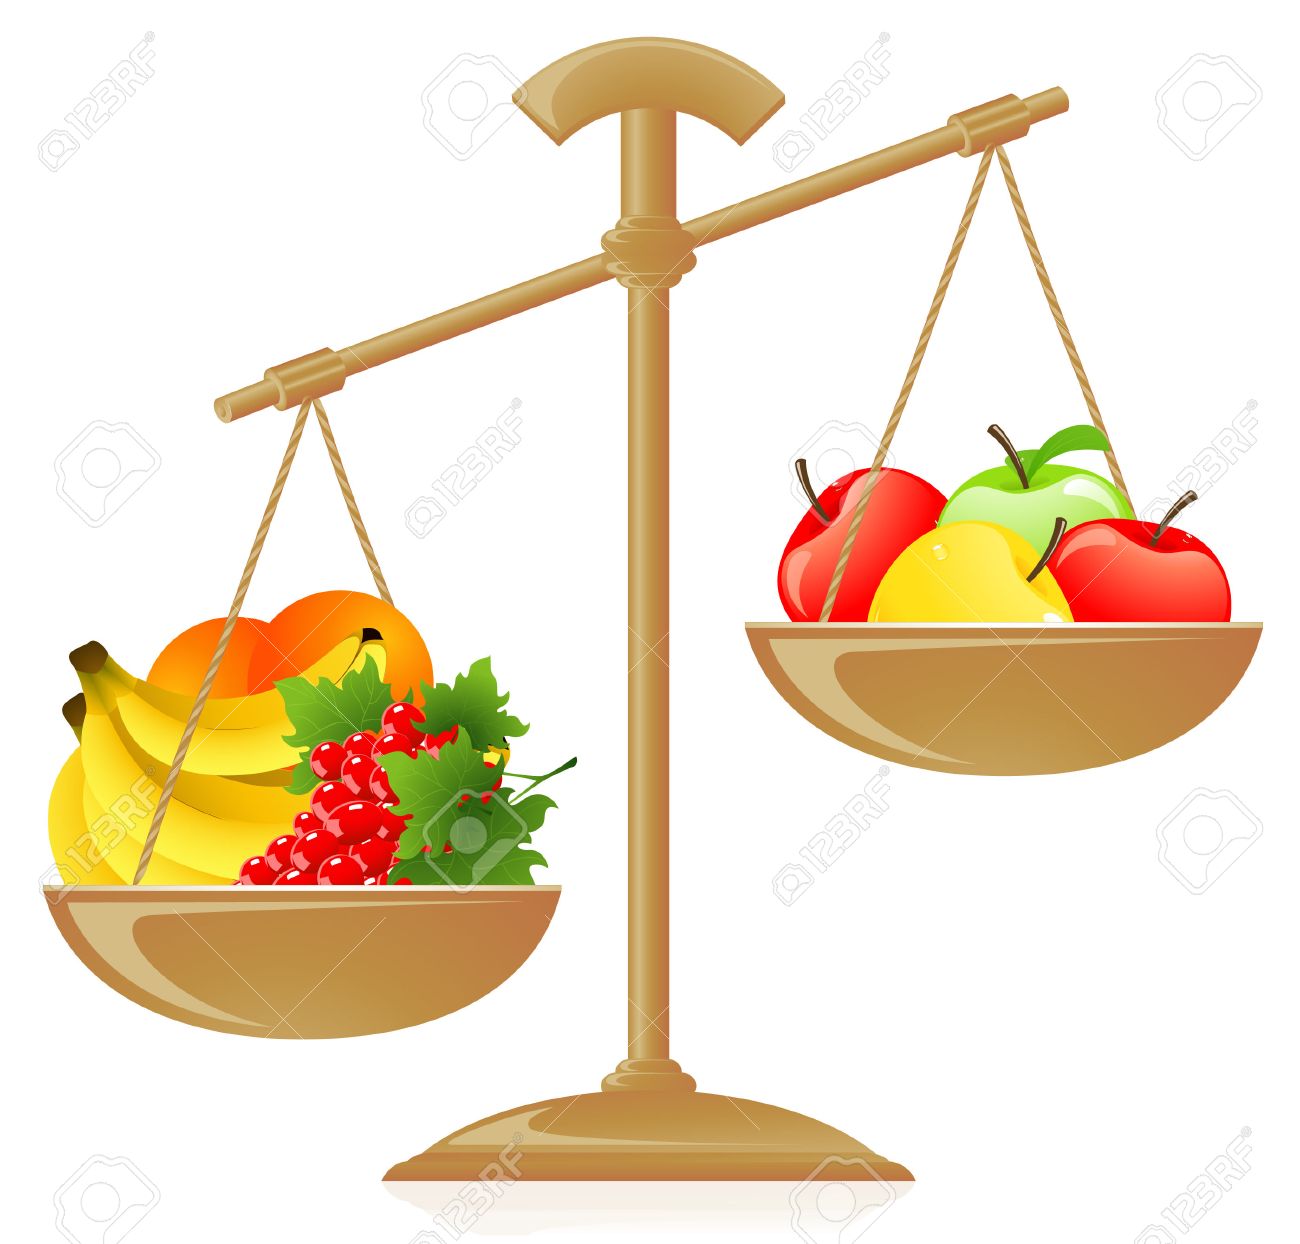 Scale free download best. Weight clipart balance